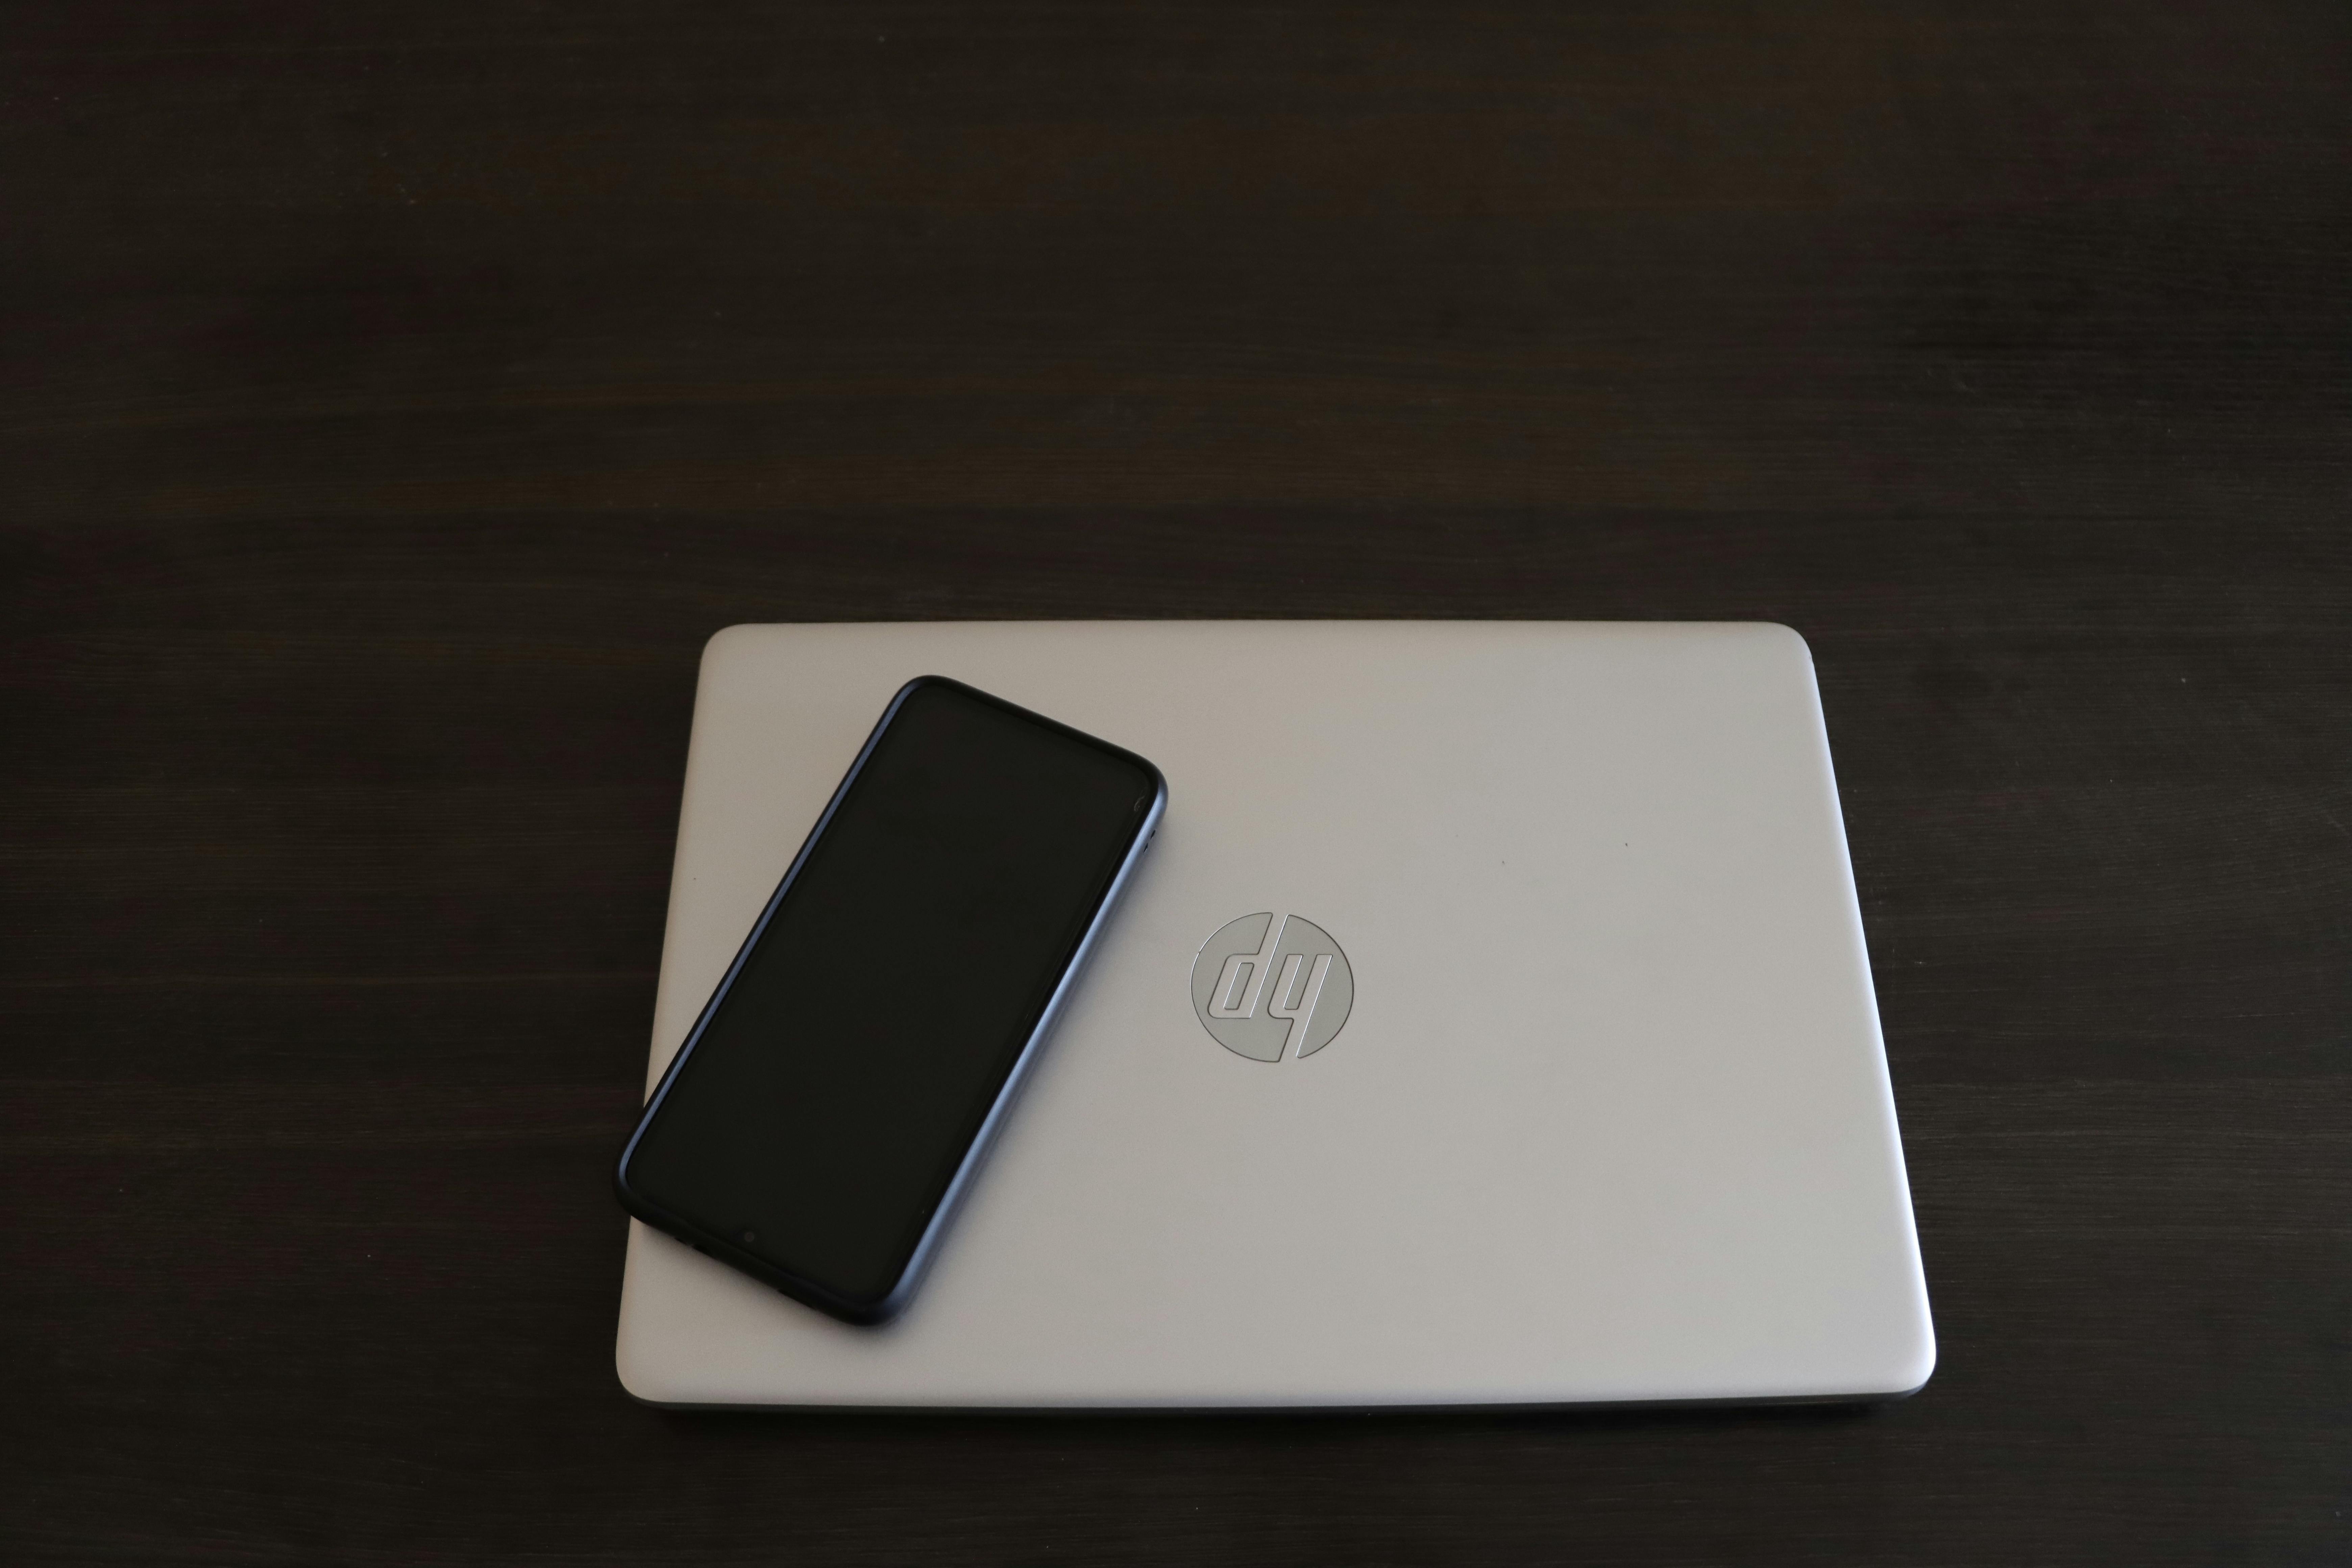 Choosing an HP Laptop that meets your needs might be difficult, but this guide can help.